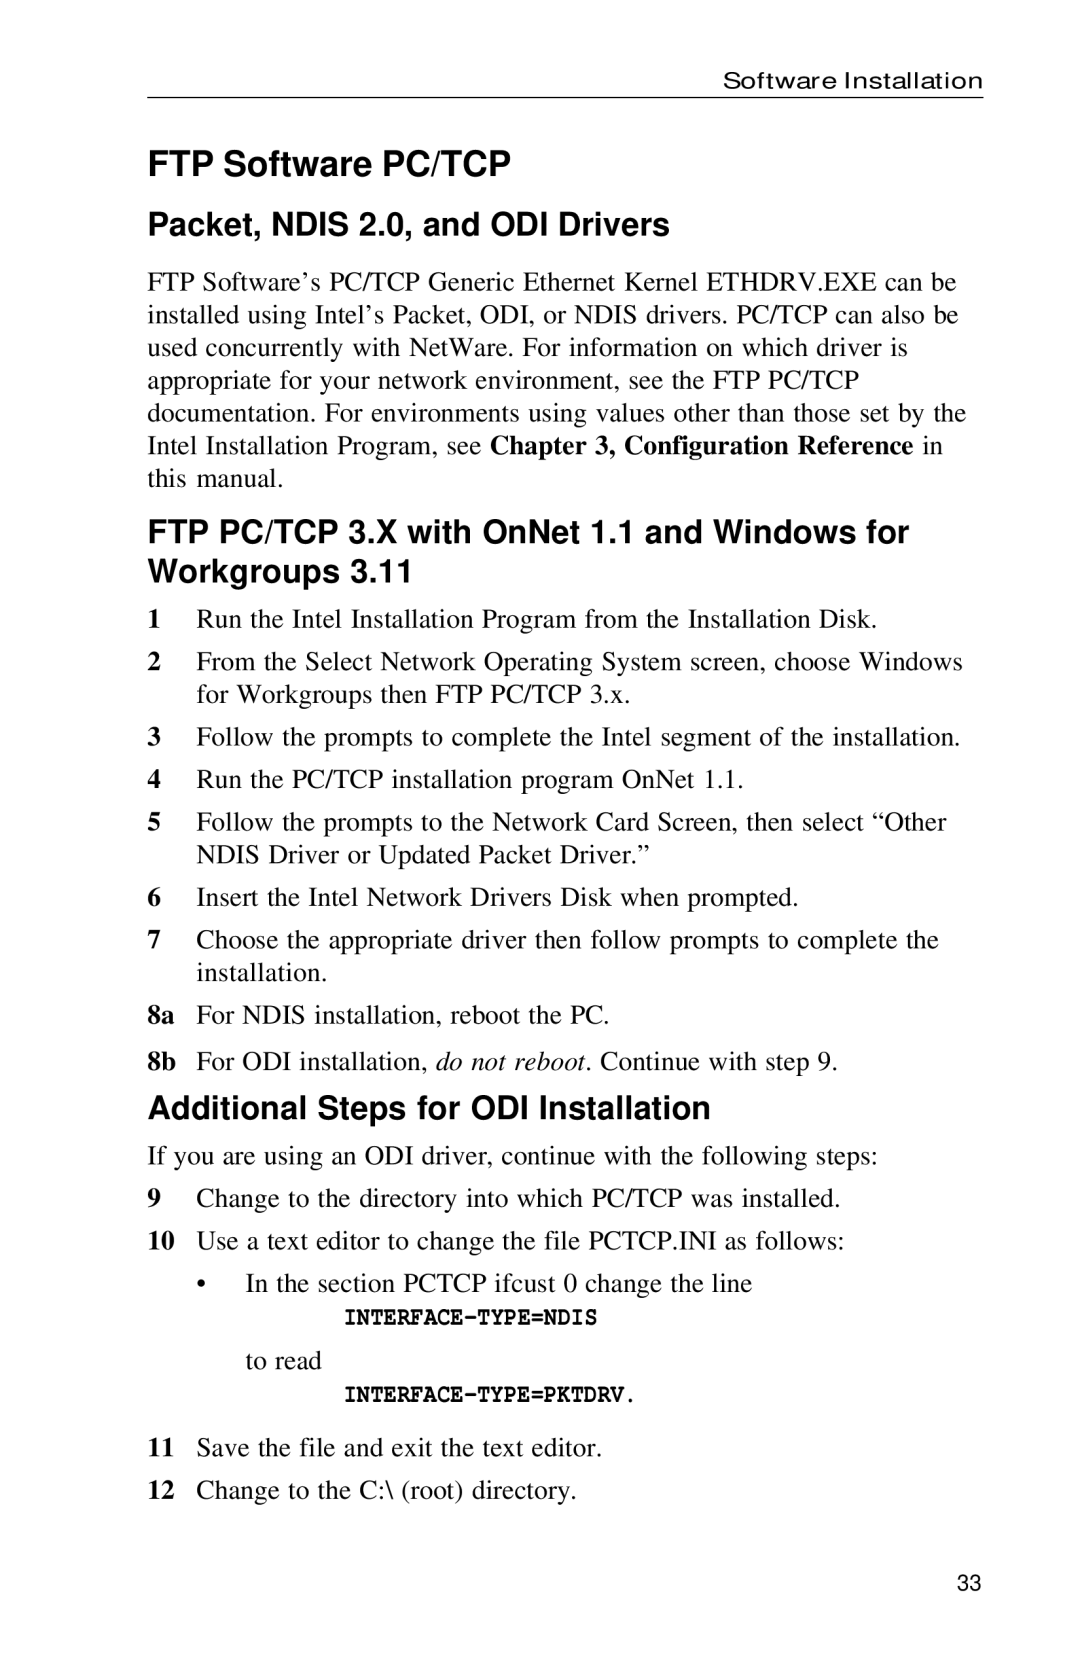 Intel PRO FTP Software PC/TCP, Packet, Ndis 2.0, and ODI Drivers, FTP PC/TCP 3.X with OnNet 1.1 and Windows for Workgroups 